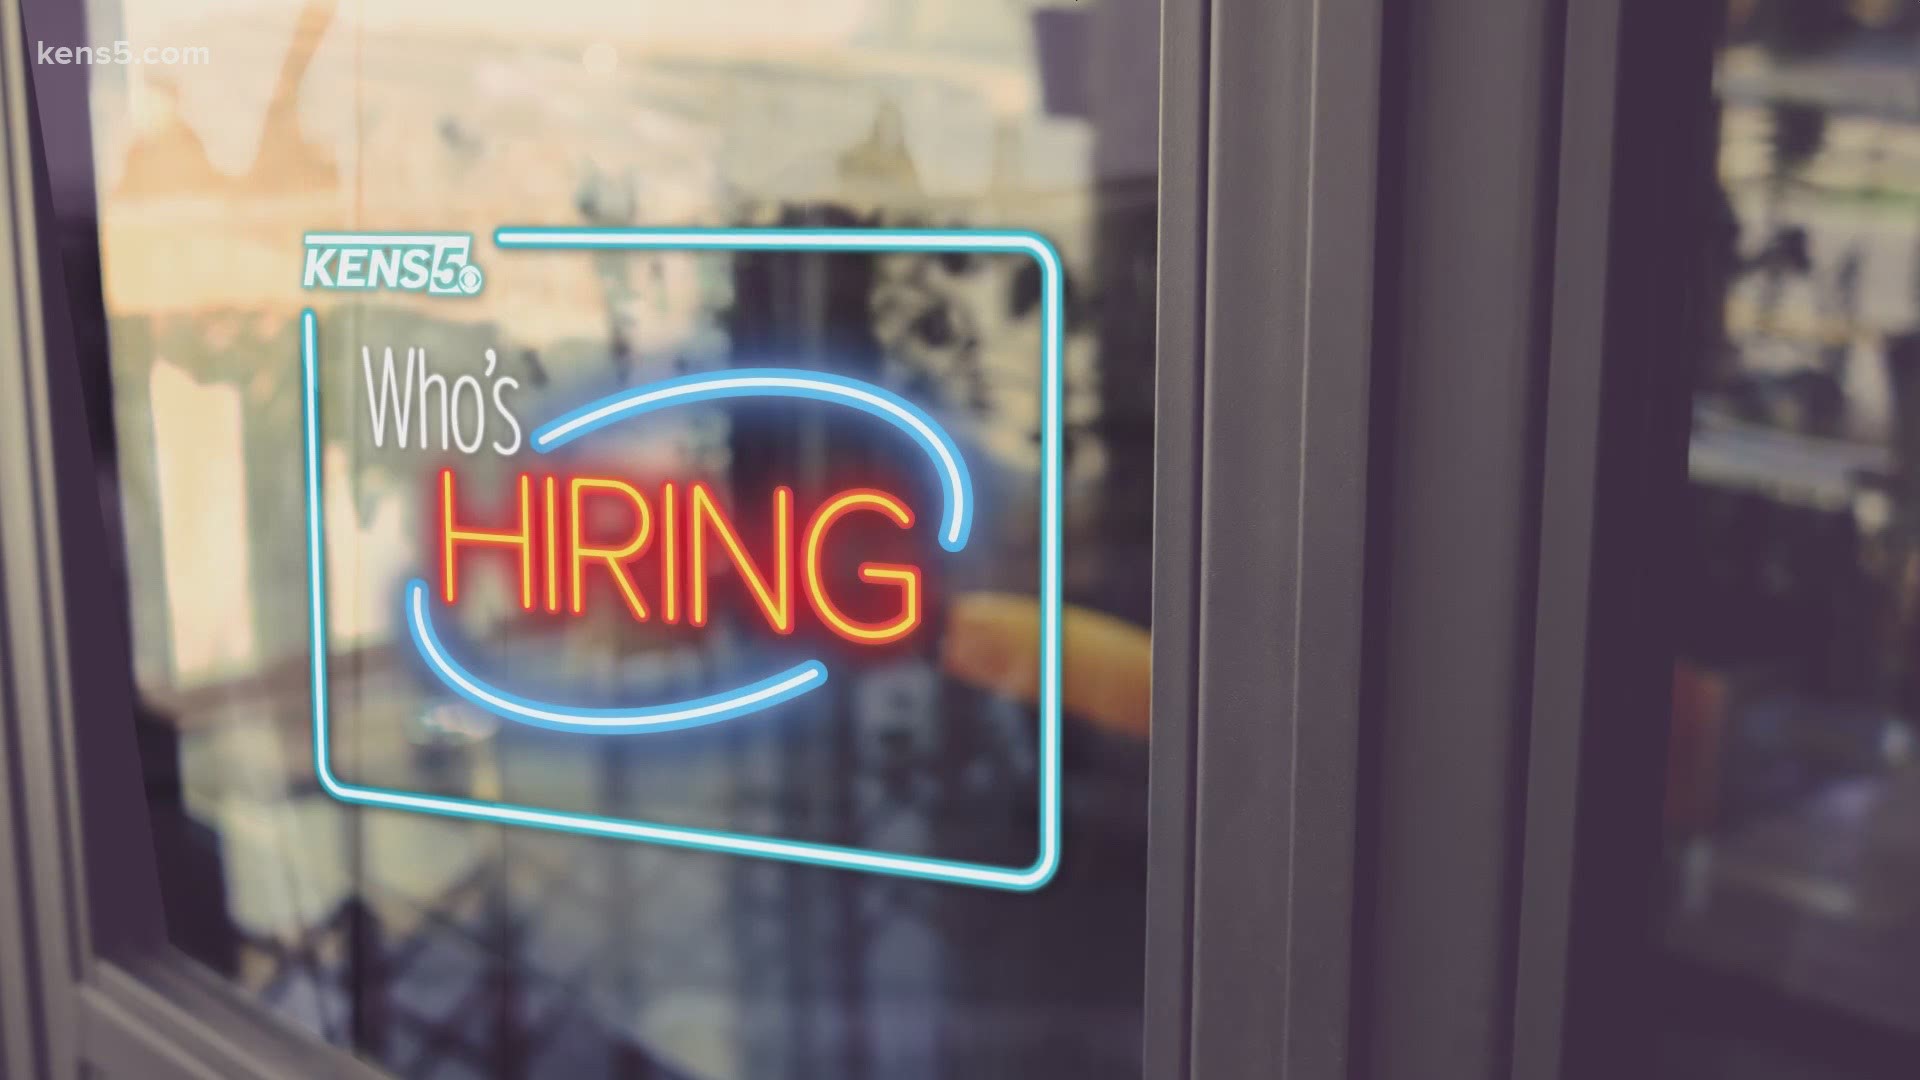 Every Tuesday, KENS 5 shows you which local employers are looking to fill positions in the San Antonio area.